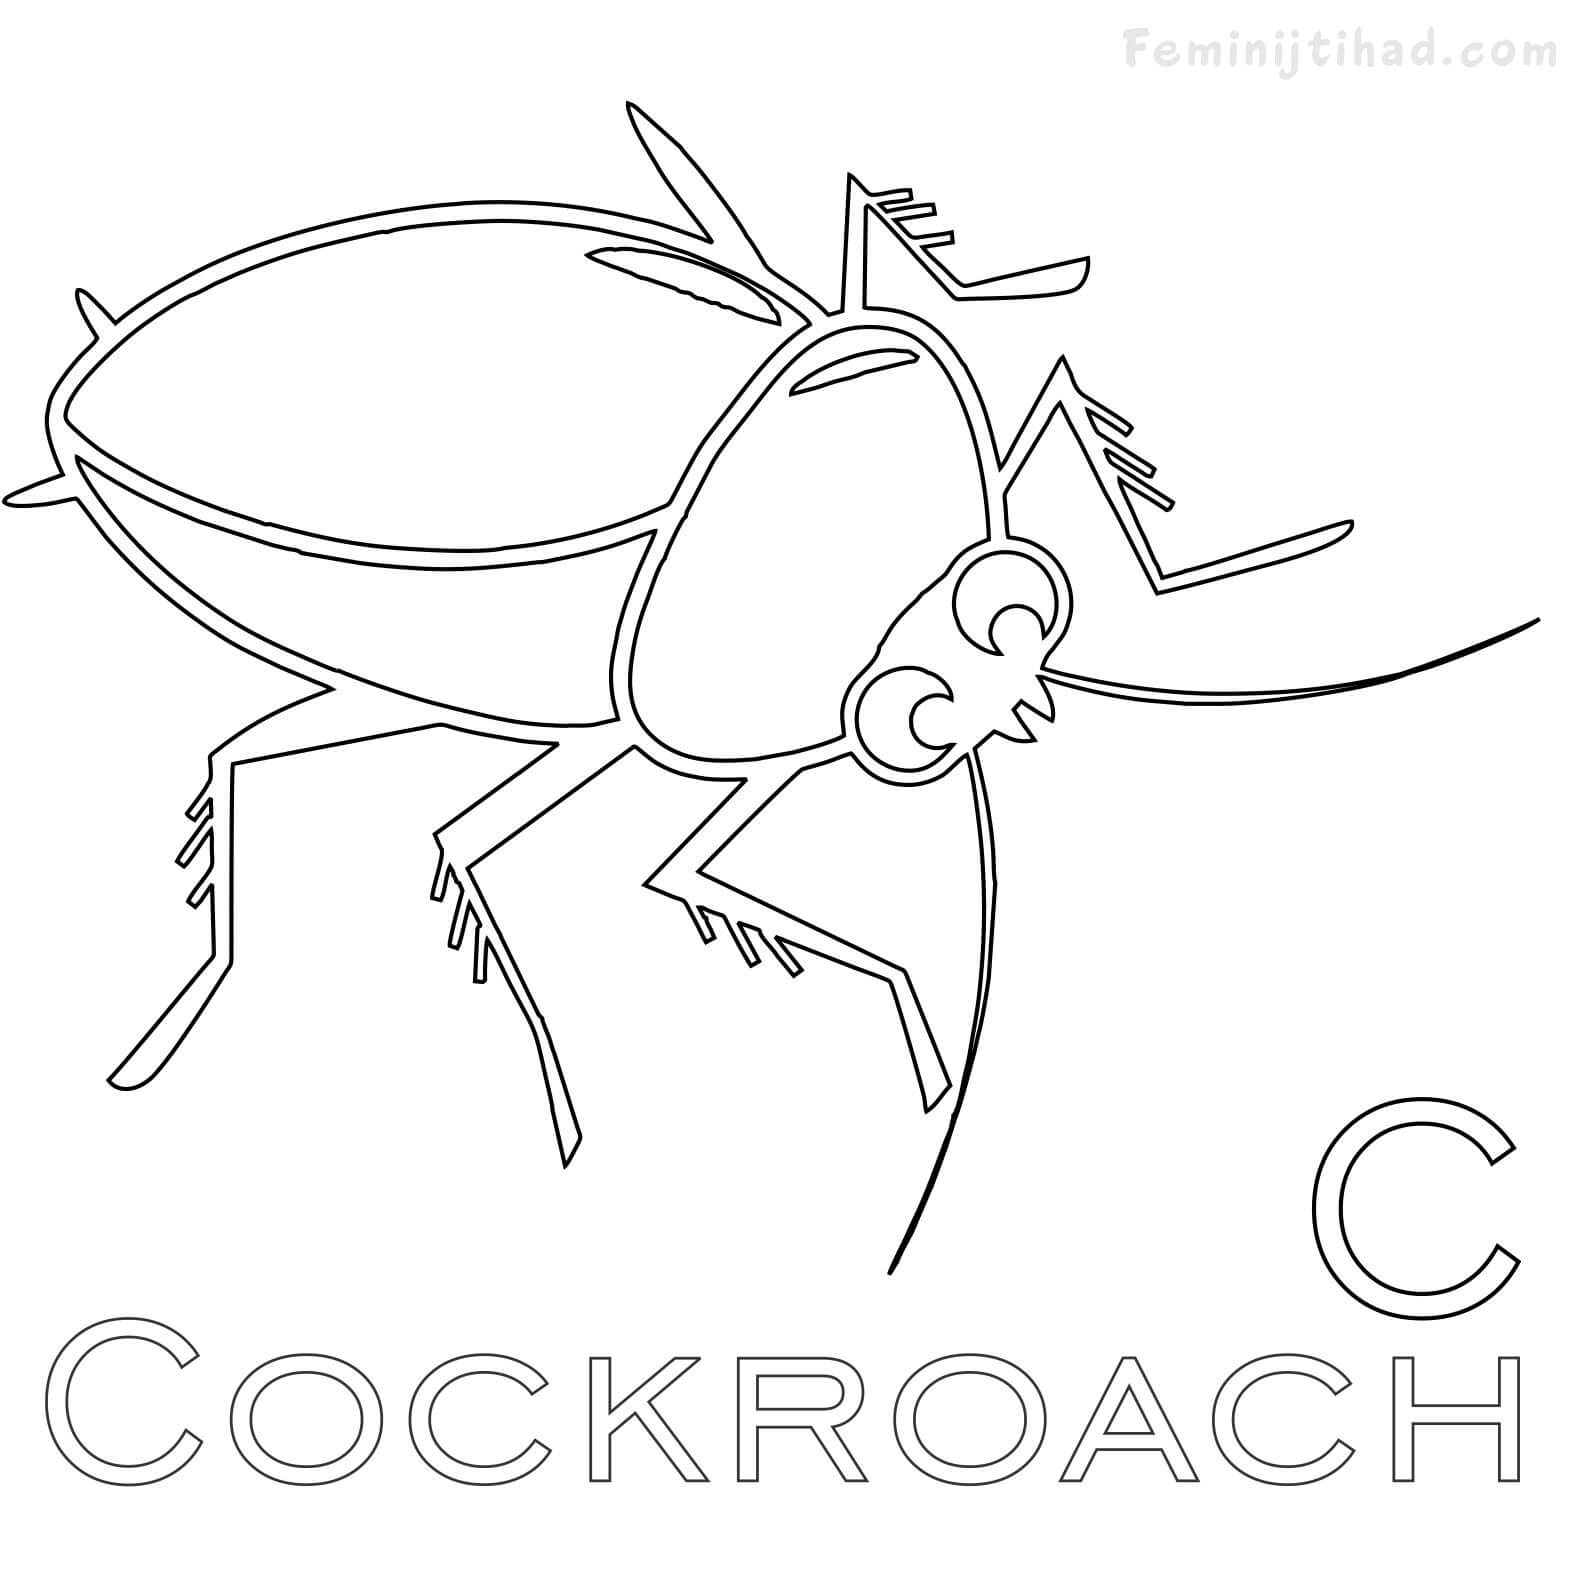 c for cockroach coloring page